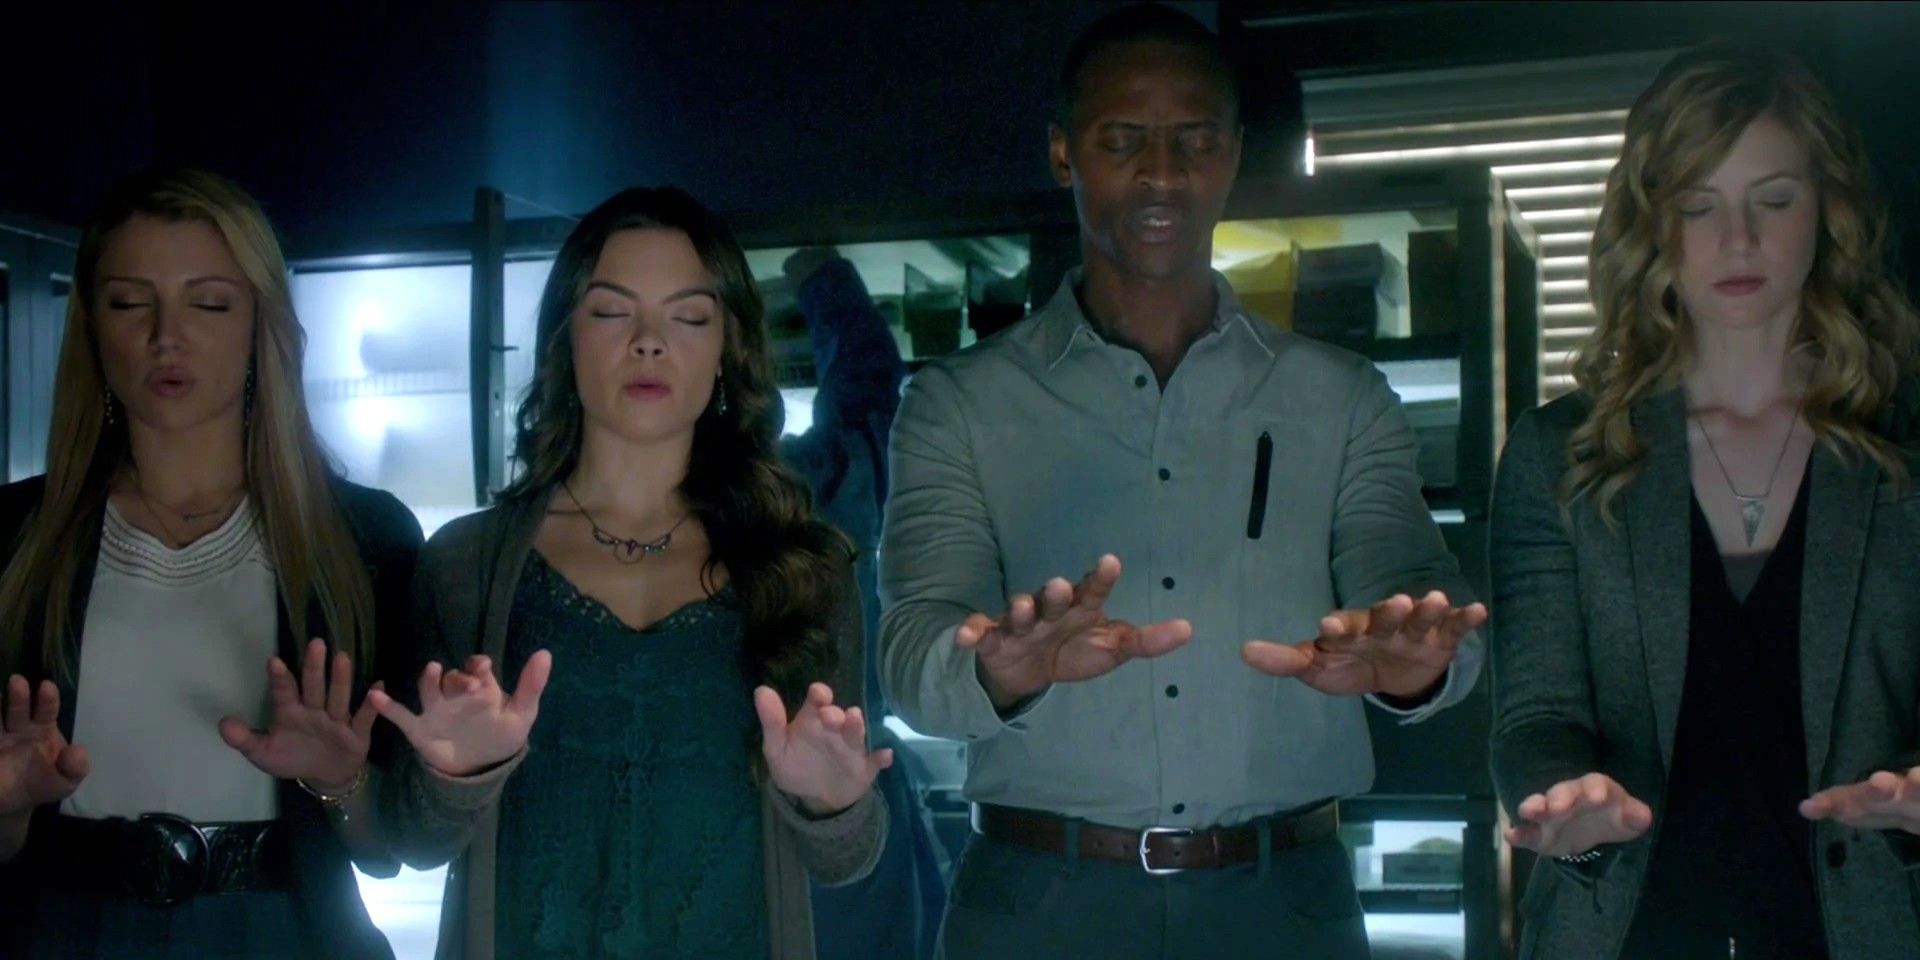 The heretics performing a spell with their hands raised in The Vampire Diaries